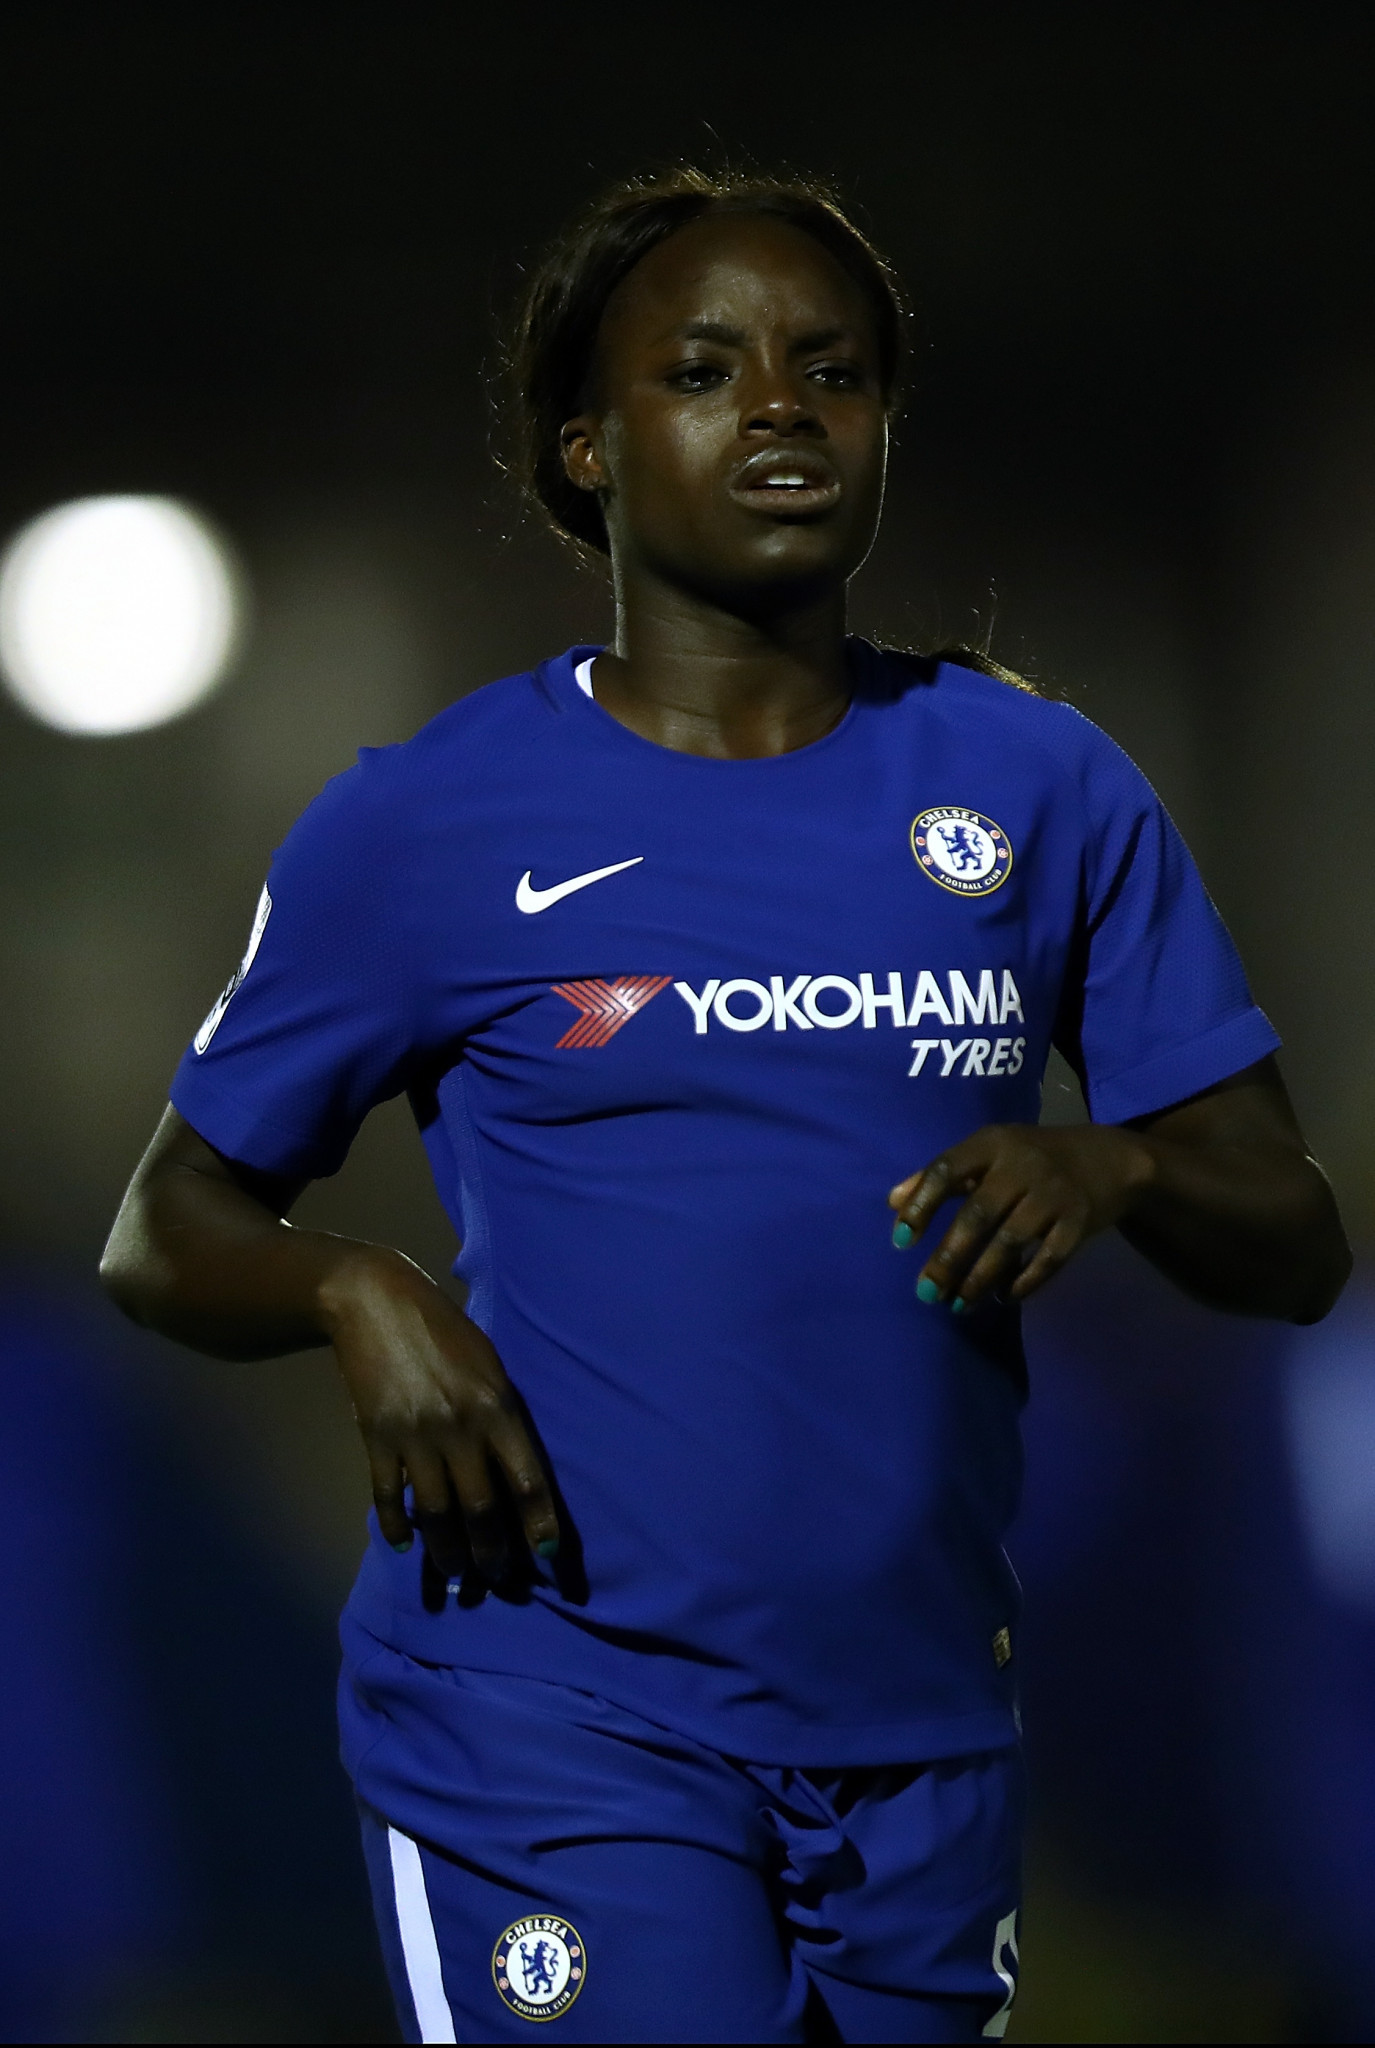 Chelsea forward Eniola Aluko claimed she had not received payment of an £80,000 settlement fee in full from the FA ©Getty Images